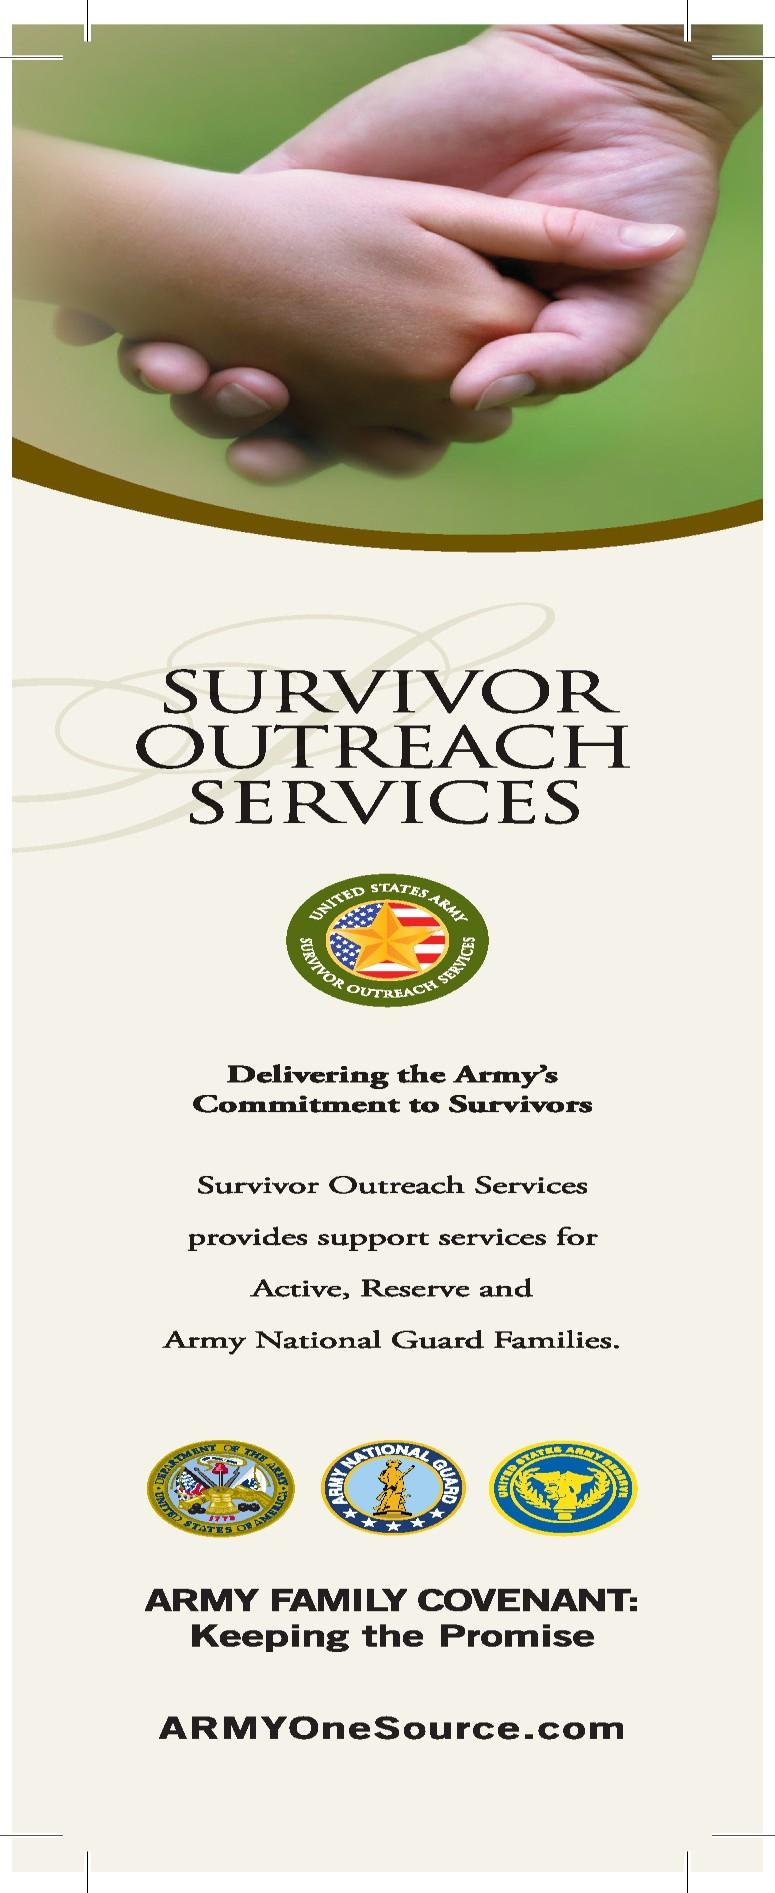 42nd Edition April 2014 Finally, now any Illinois resident who is a surviving widow/widower, parent or siblings of a person who served in the U.S.